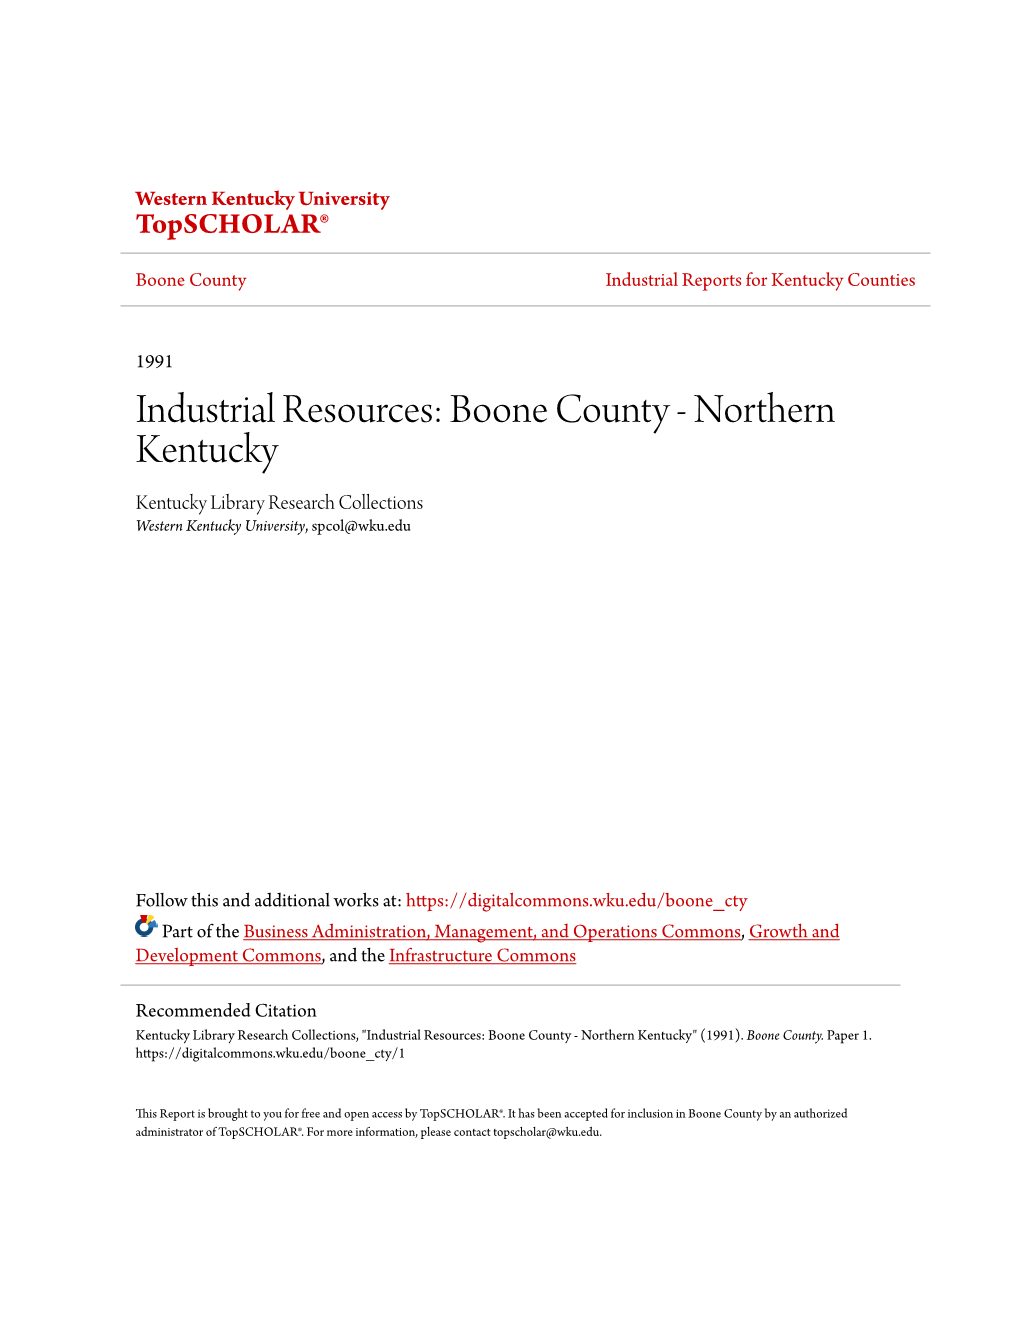 Industrial Resources: Boone County - Northern Kentucky Kentucky Library Research Collections Western Kentucky University, Spcol@Wku.Edu